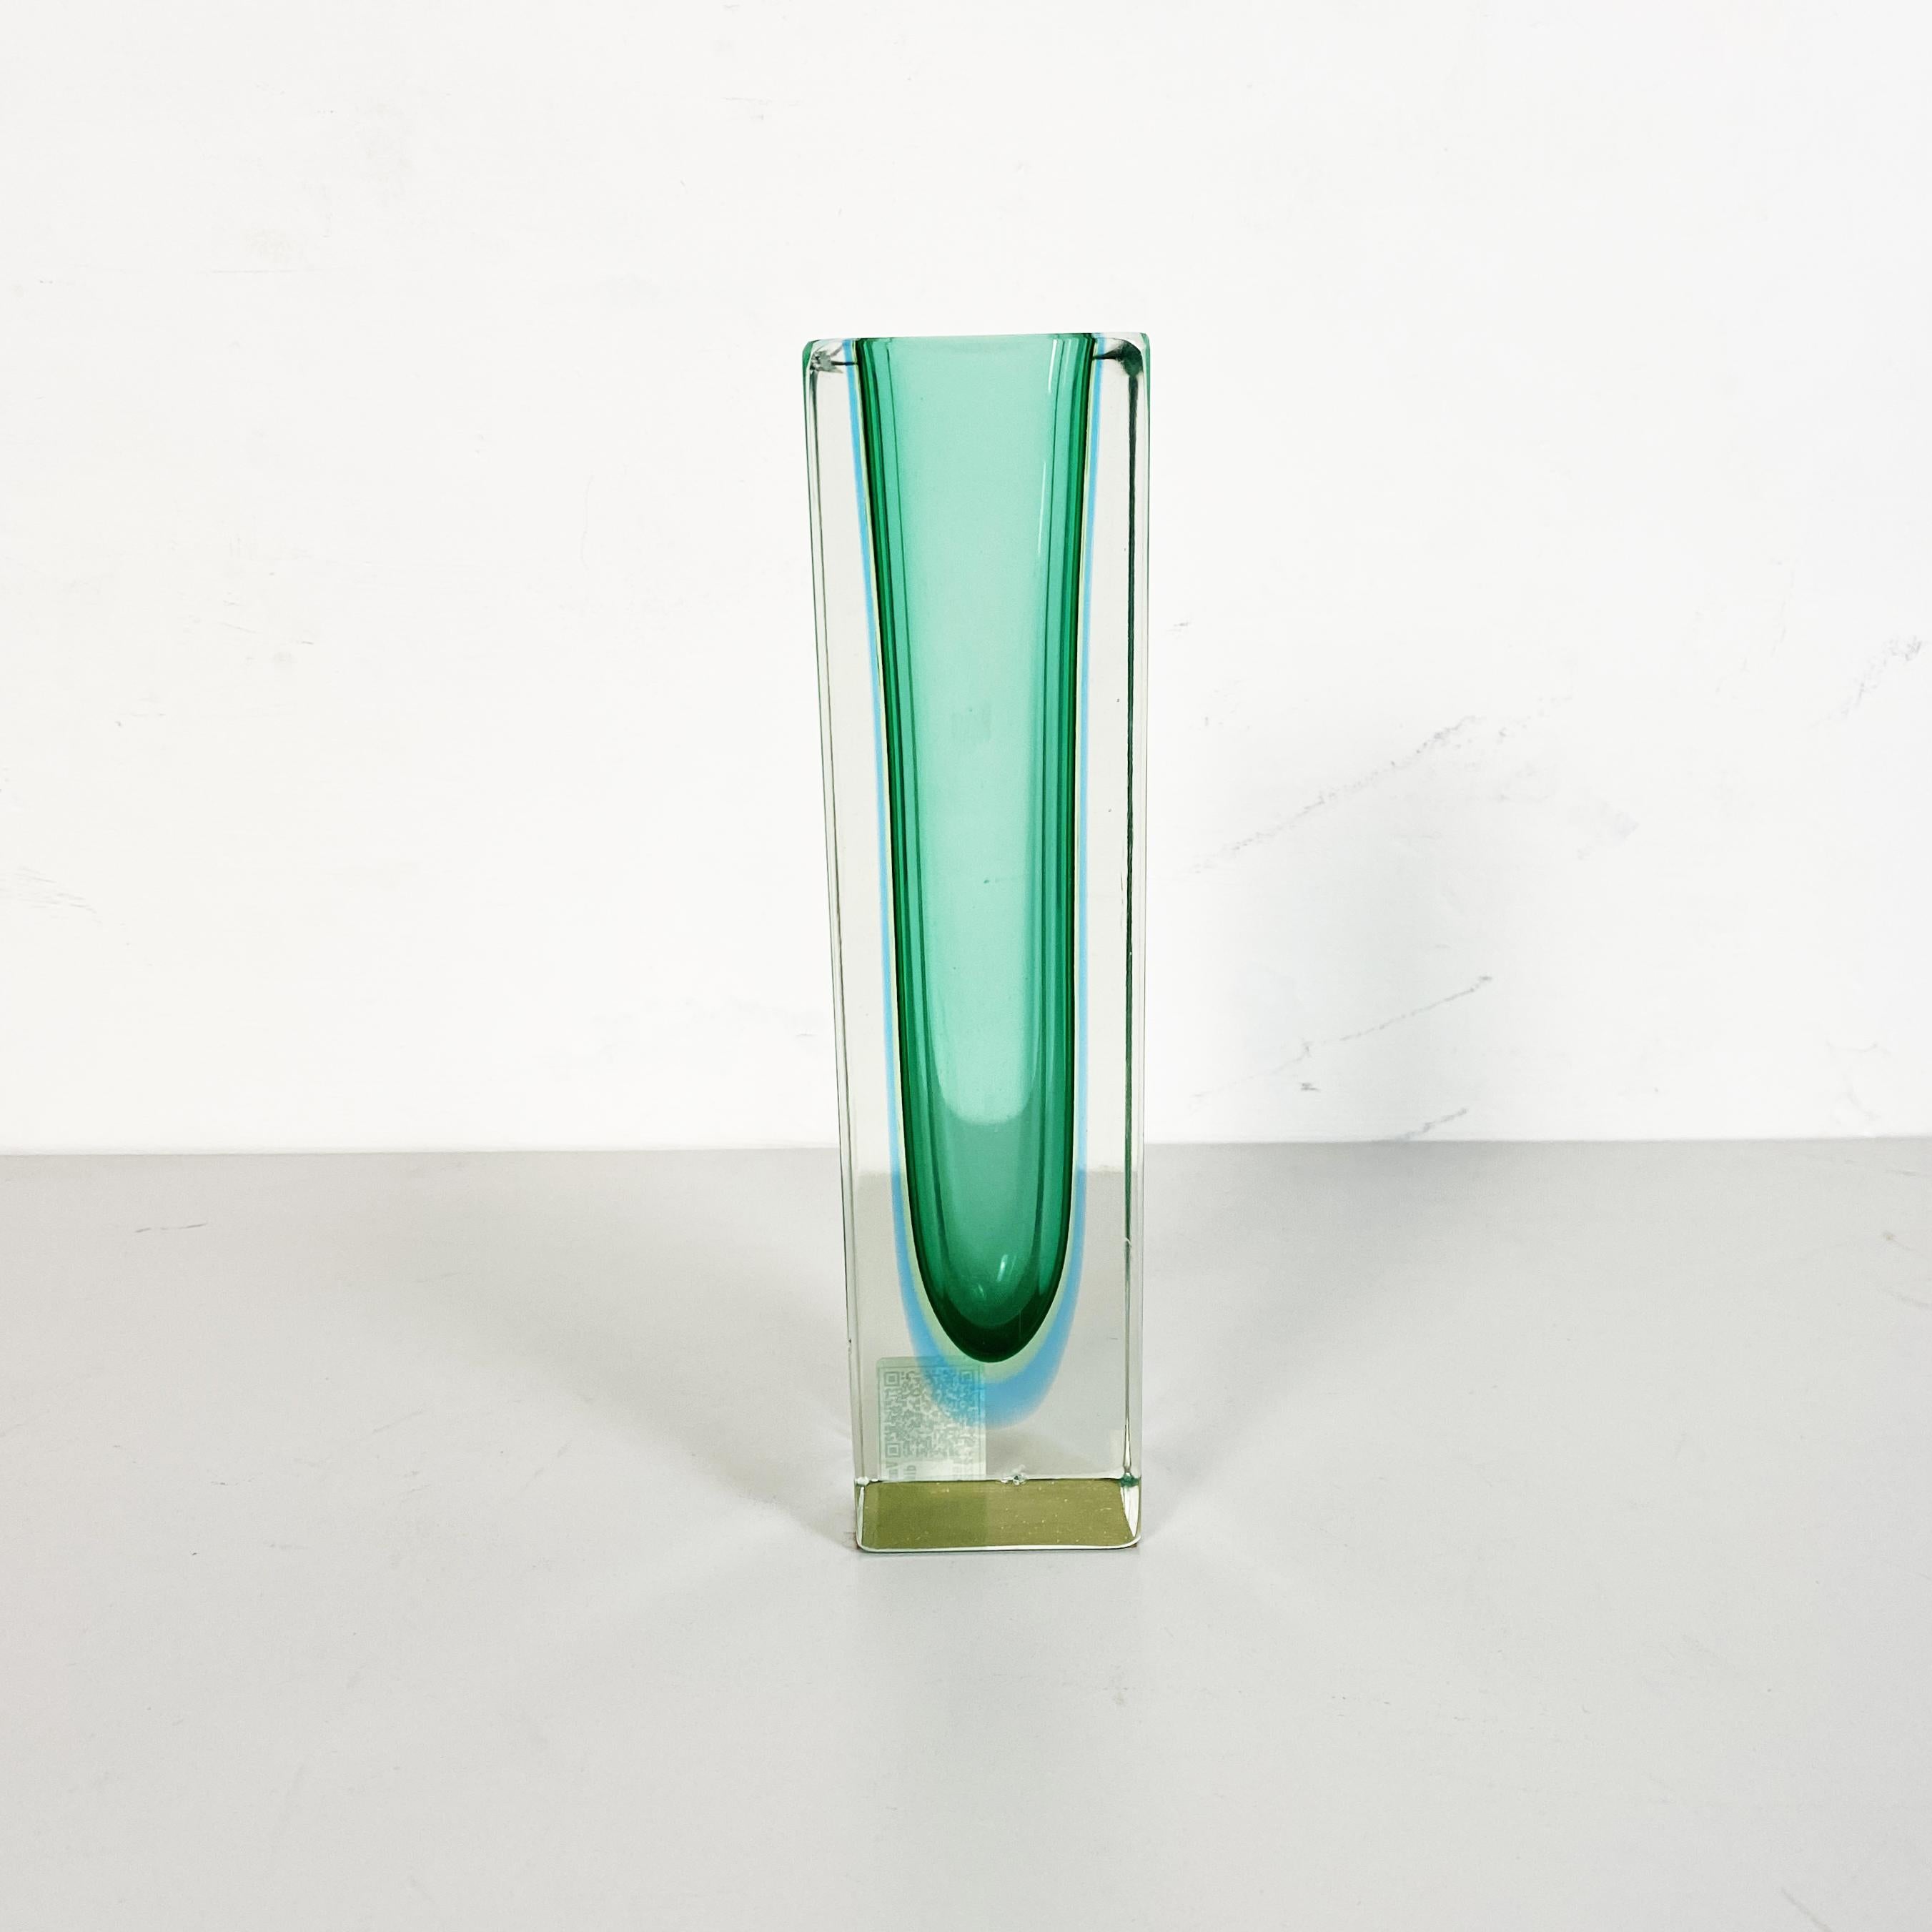 Italian Mid-Century Green Murano Glass Vase with Internal Blue Shades, 1970s In Good Condition For Sale In MIlano, IT